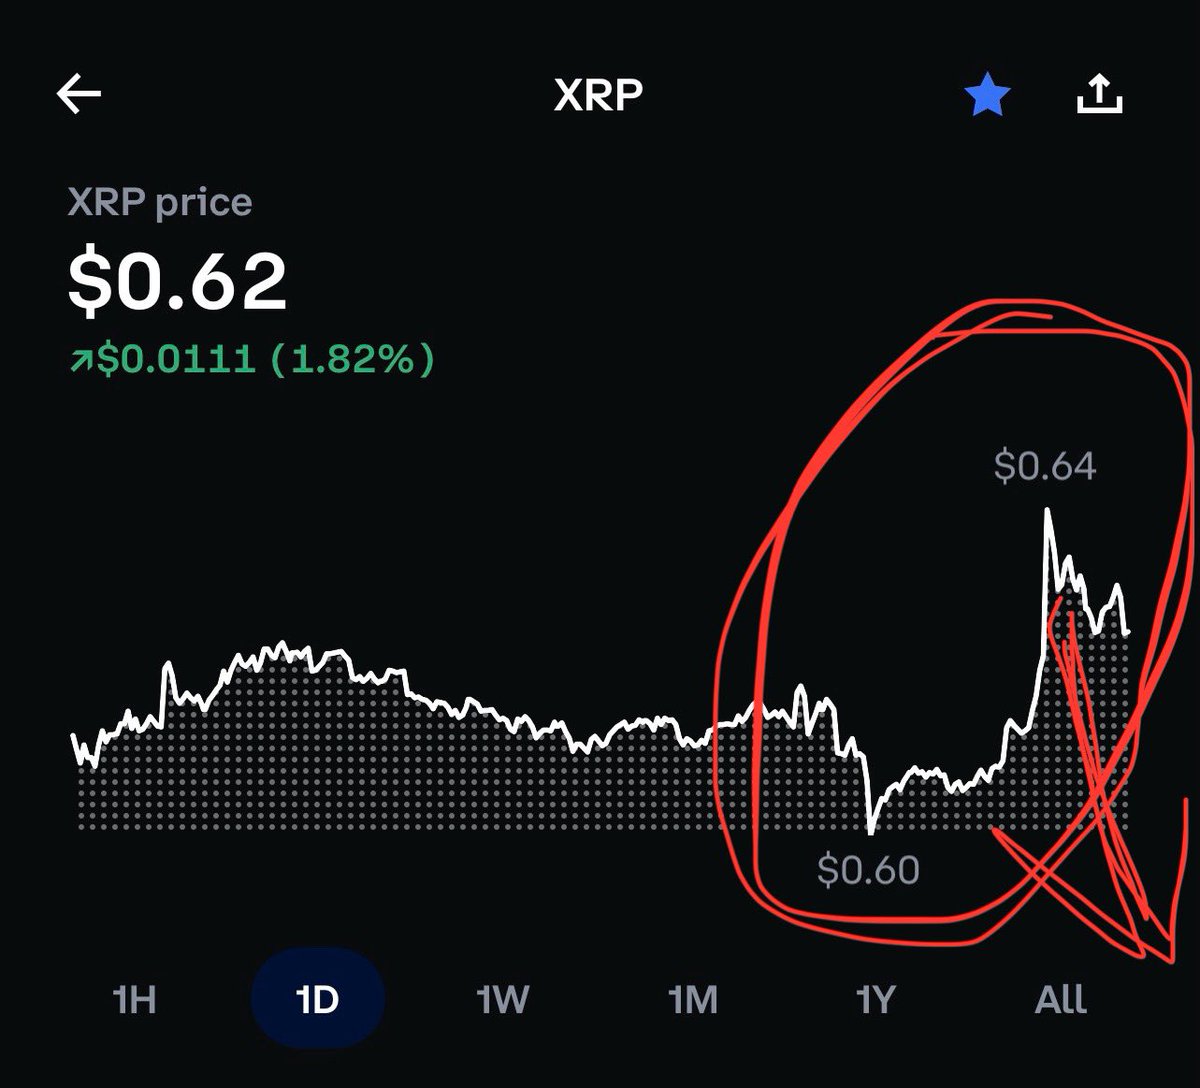 Uh ohhh, we all know what happens when #XRP randomly shoots up when the rest of the market is trending sideways or down….

#XRPCommunity #XRPArmy #XRPHolders